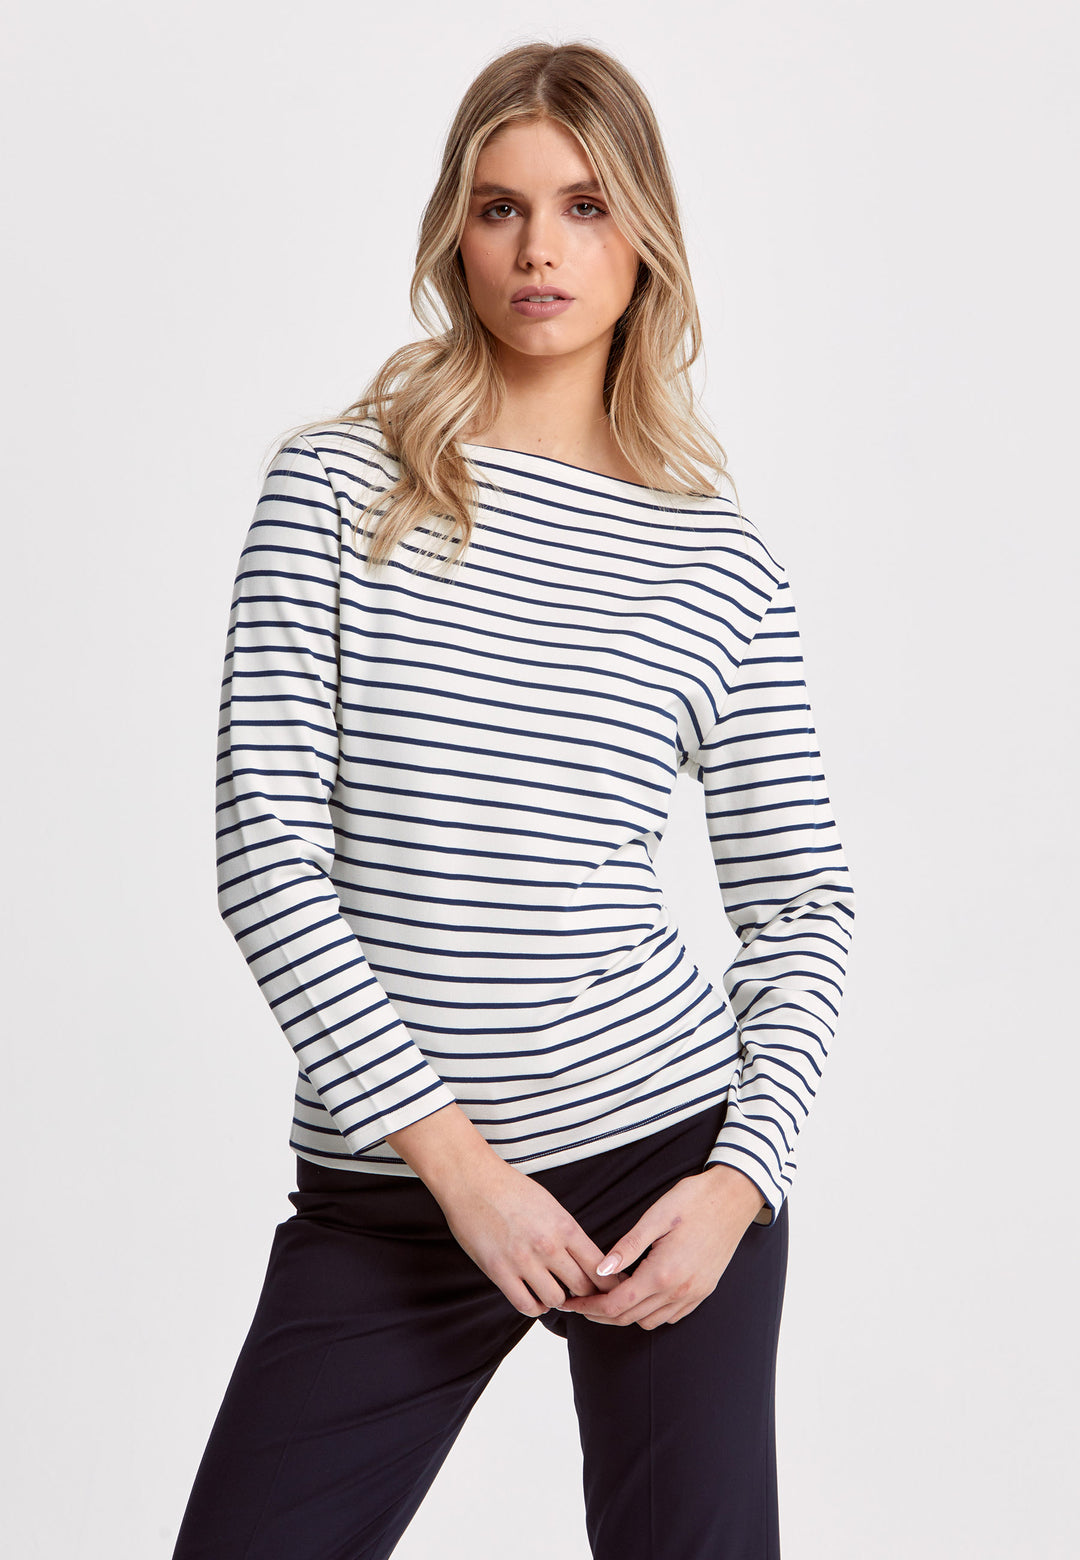 Experience the timeless elegance of our Teagan Stripe Top, expertly crafted with a luxurious stretch jersey and complemented by a sleek round neck. Available in both ecru and navy stripe, it's a must-have essential for any sophisticated wardrobe.